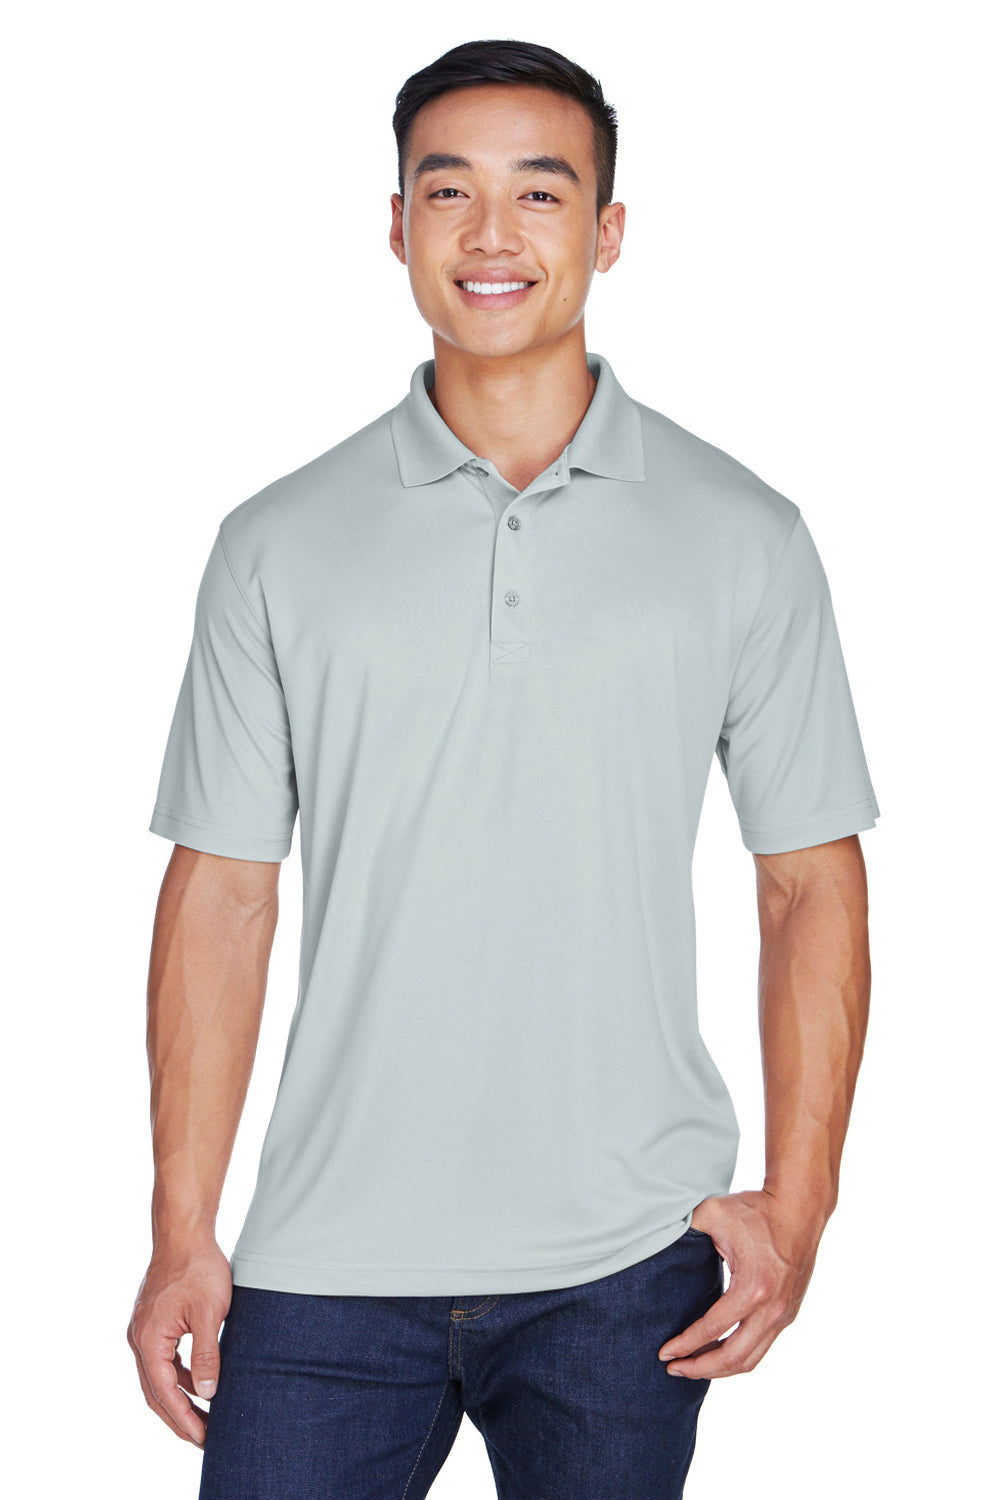 UltraClub 8405 Mens Cool & Dry Moisture Wicking Short Sleeve Polo Shirt Grey Front